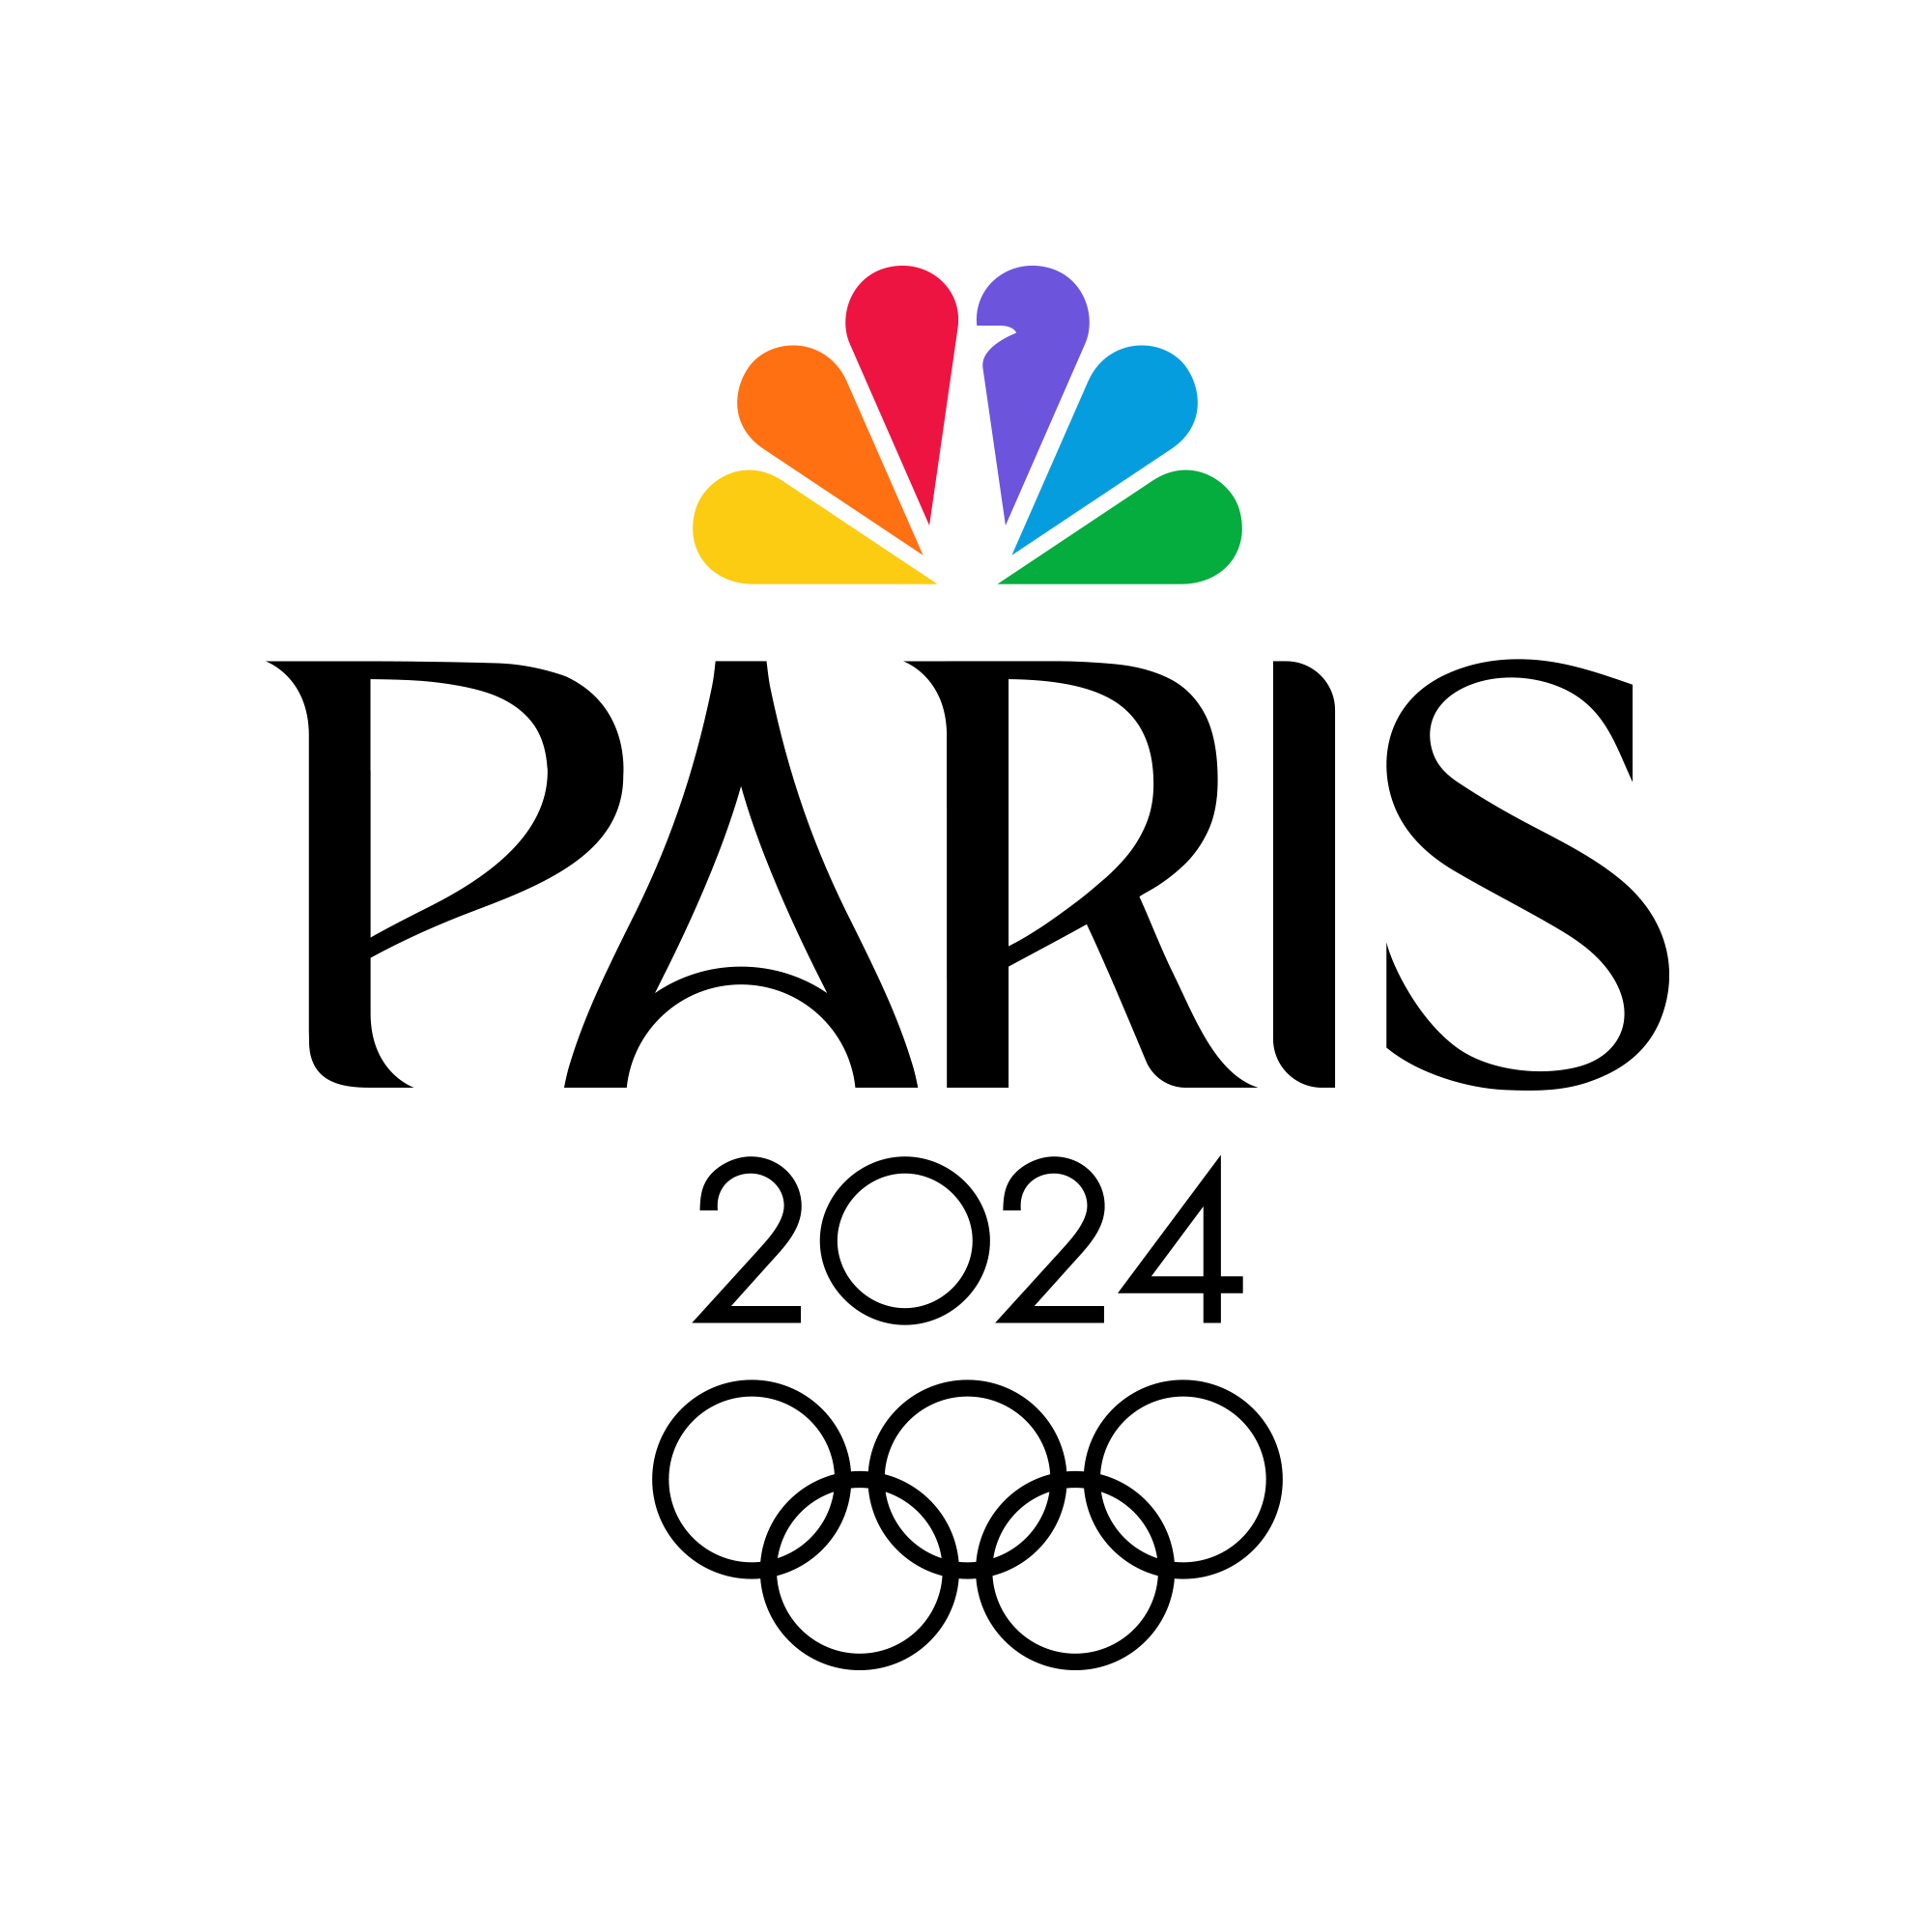 NBCUNIVERSAL FORTIFIES OLYMPIC AND PARALYMPIC MEDIA PARTNERSHIPS WITH TWITTER AND SNAPCHAT